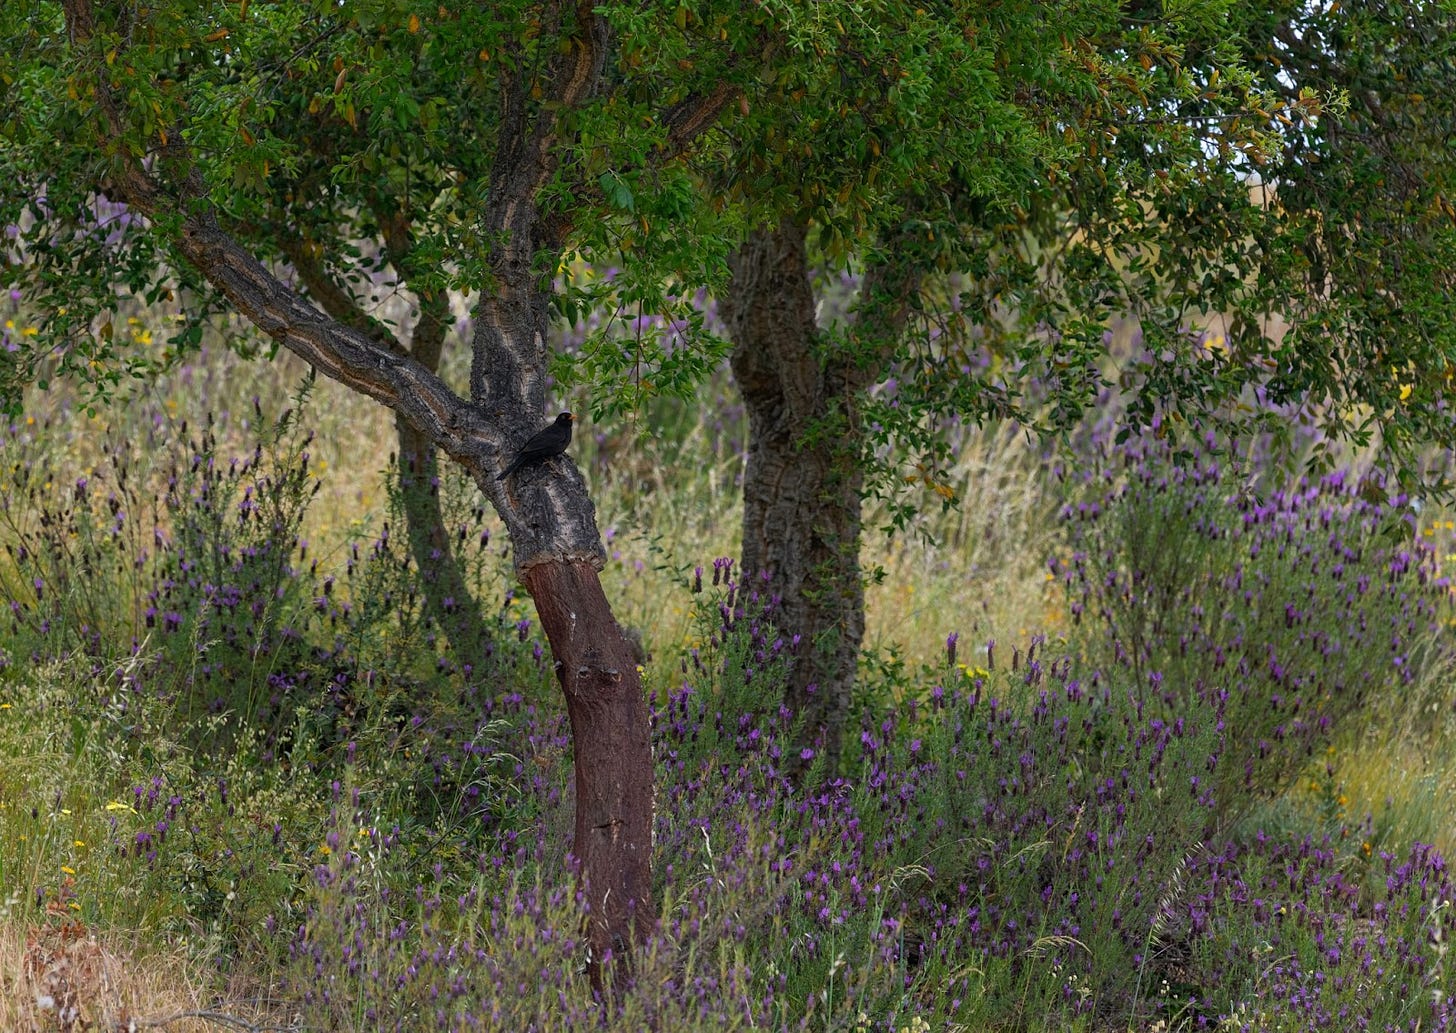 A recently harvested cork tree sits surrounded by a field of purple lavender blossoms.